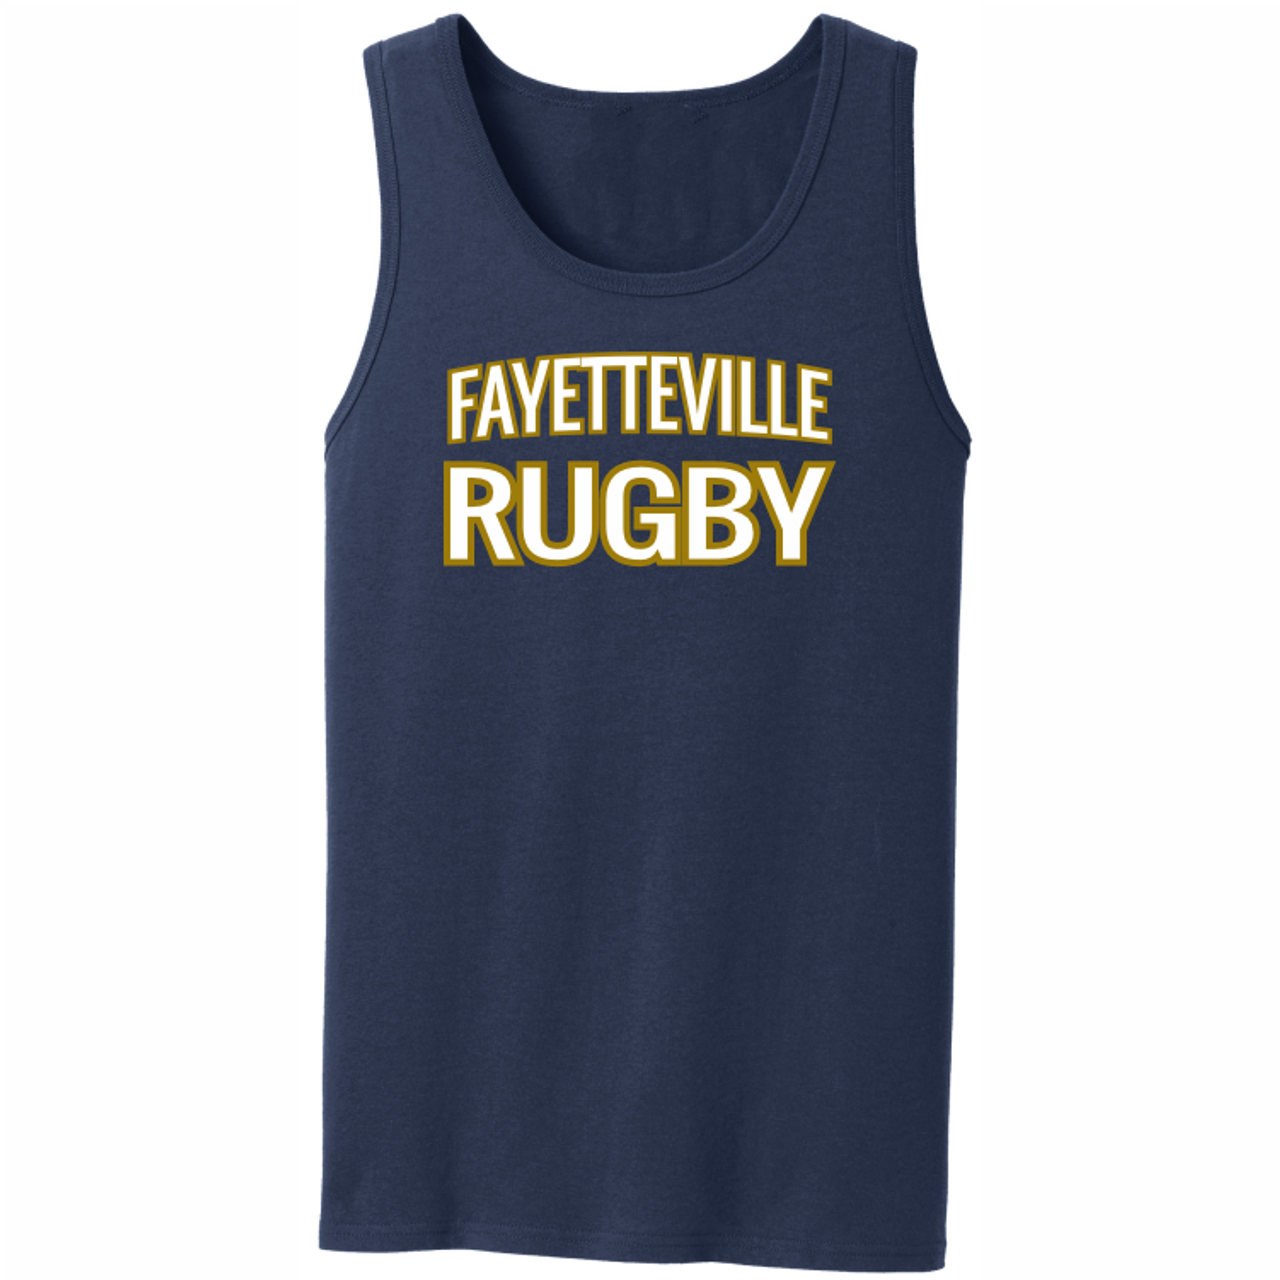 Fayetteville Area Rugby Tank Top, Navy